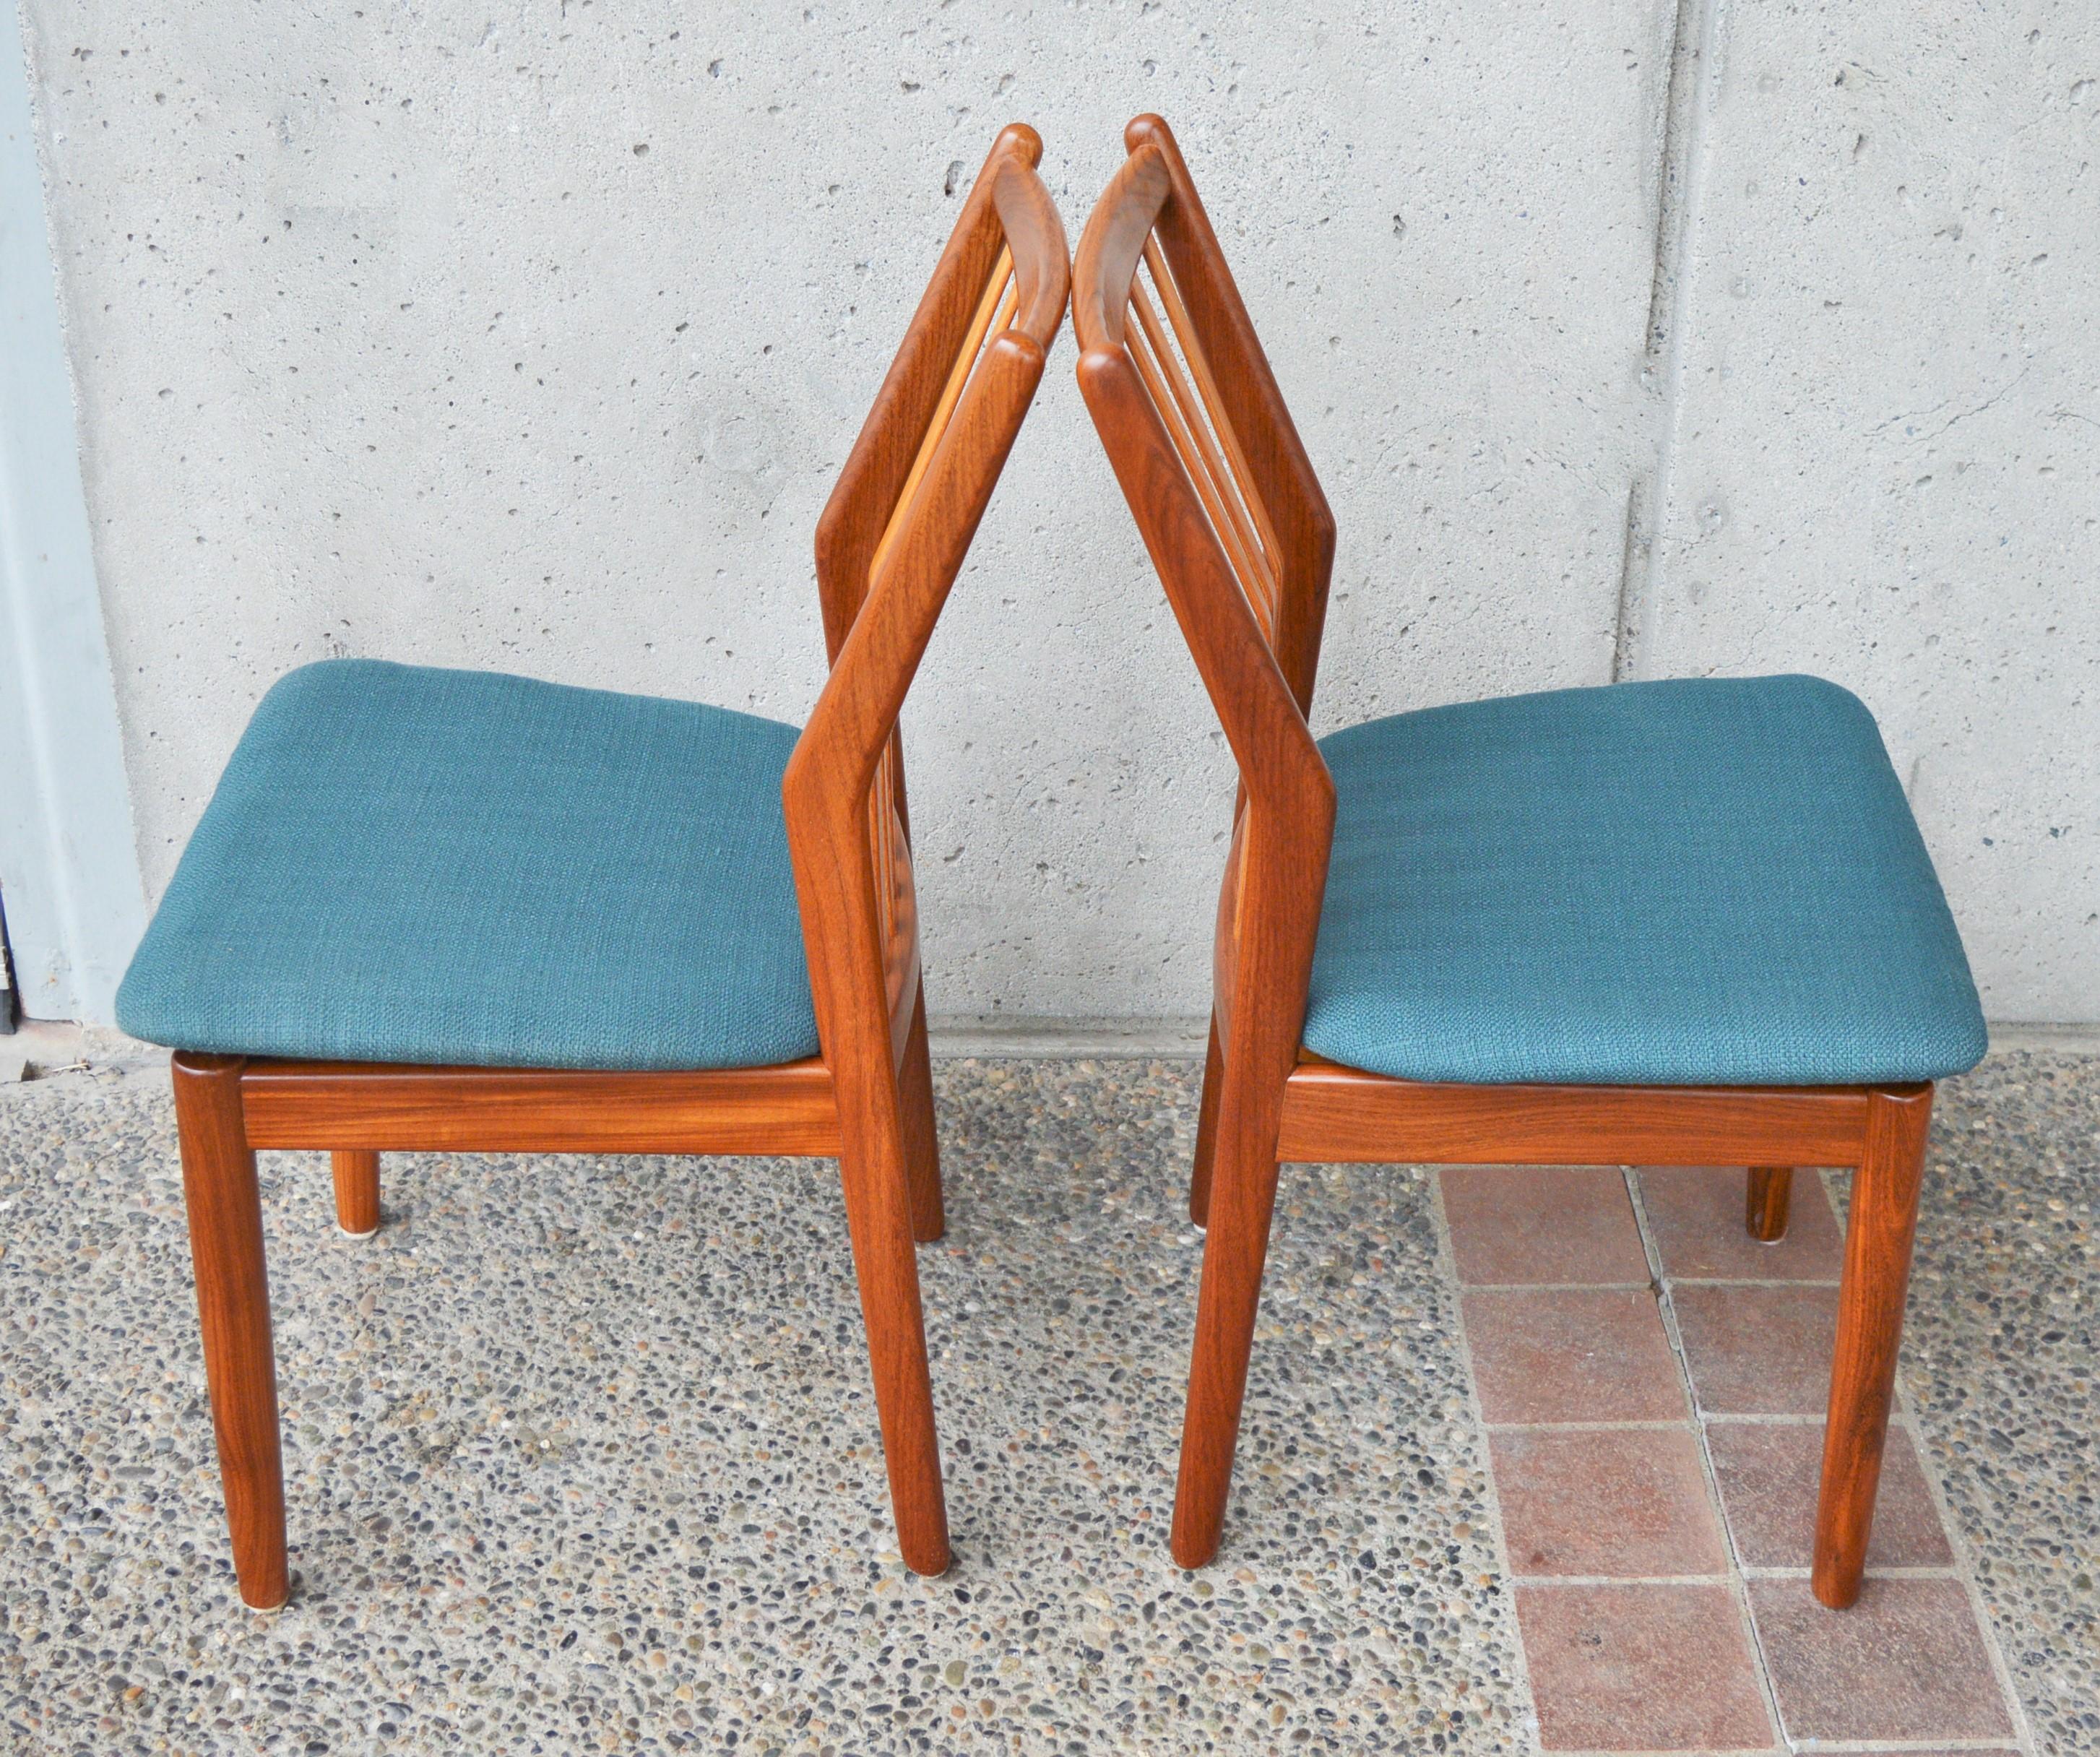 Svend Madsen Set of 4 Danish Teak Dining Chairs with Bent Backs & New Teal Tweed For Sale 7